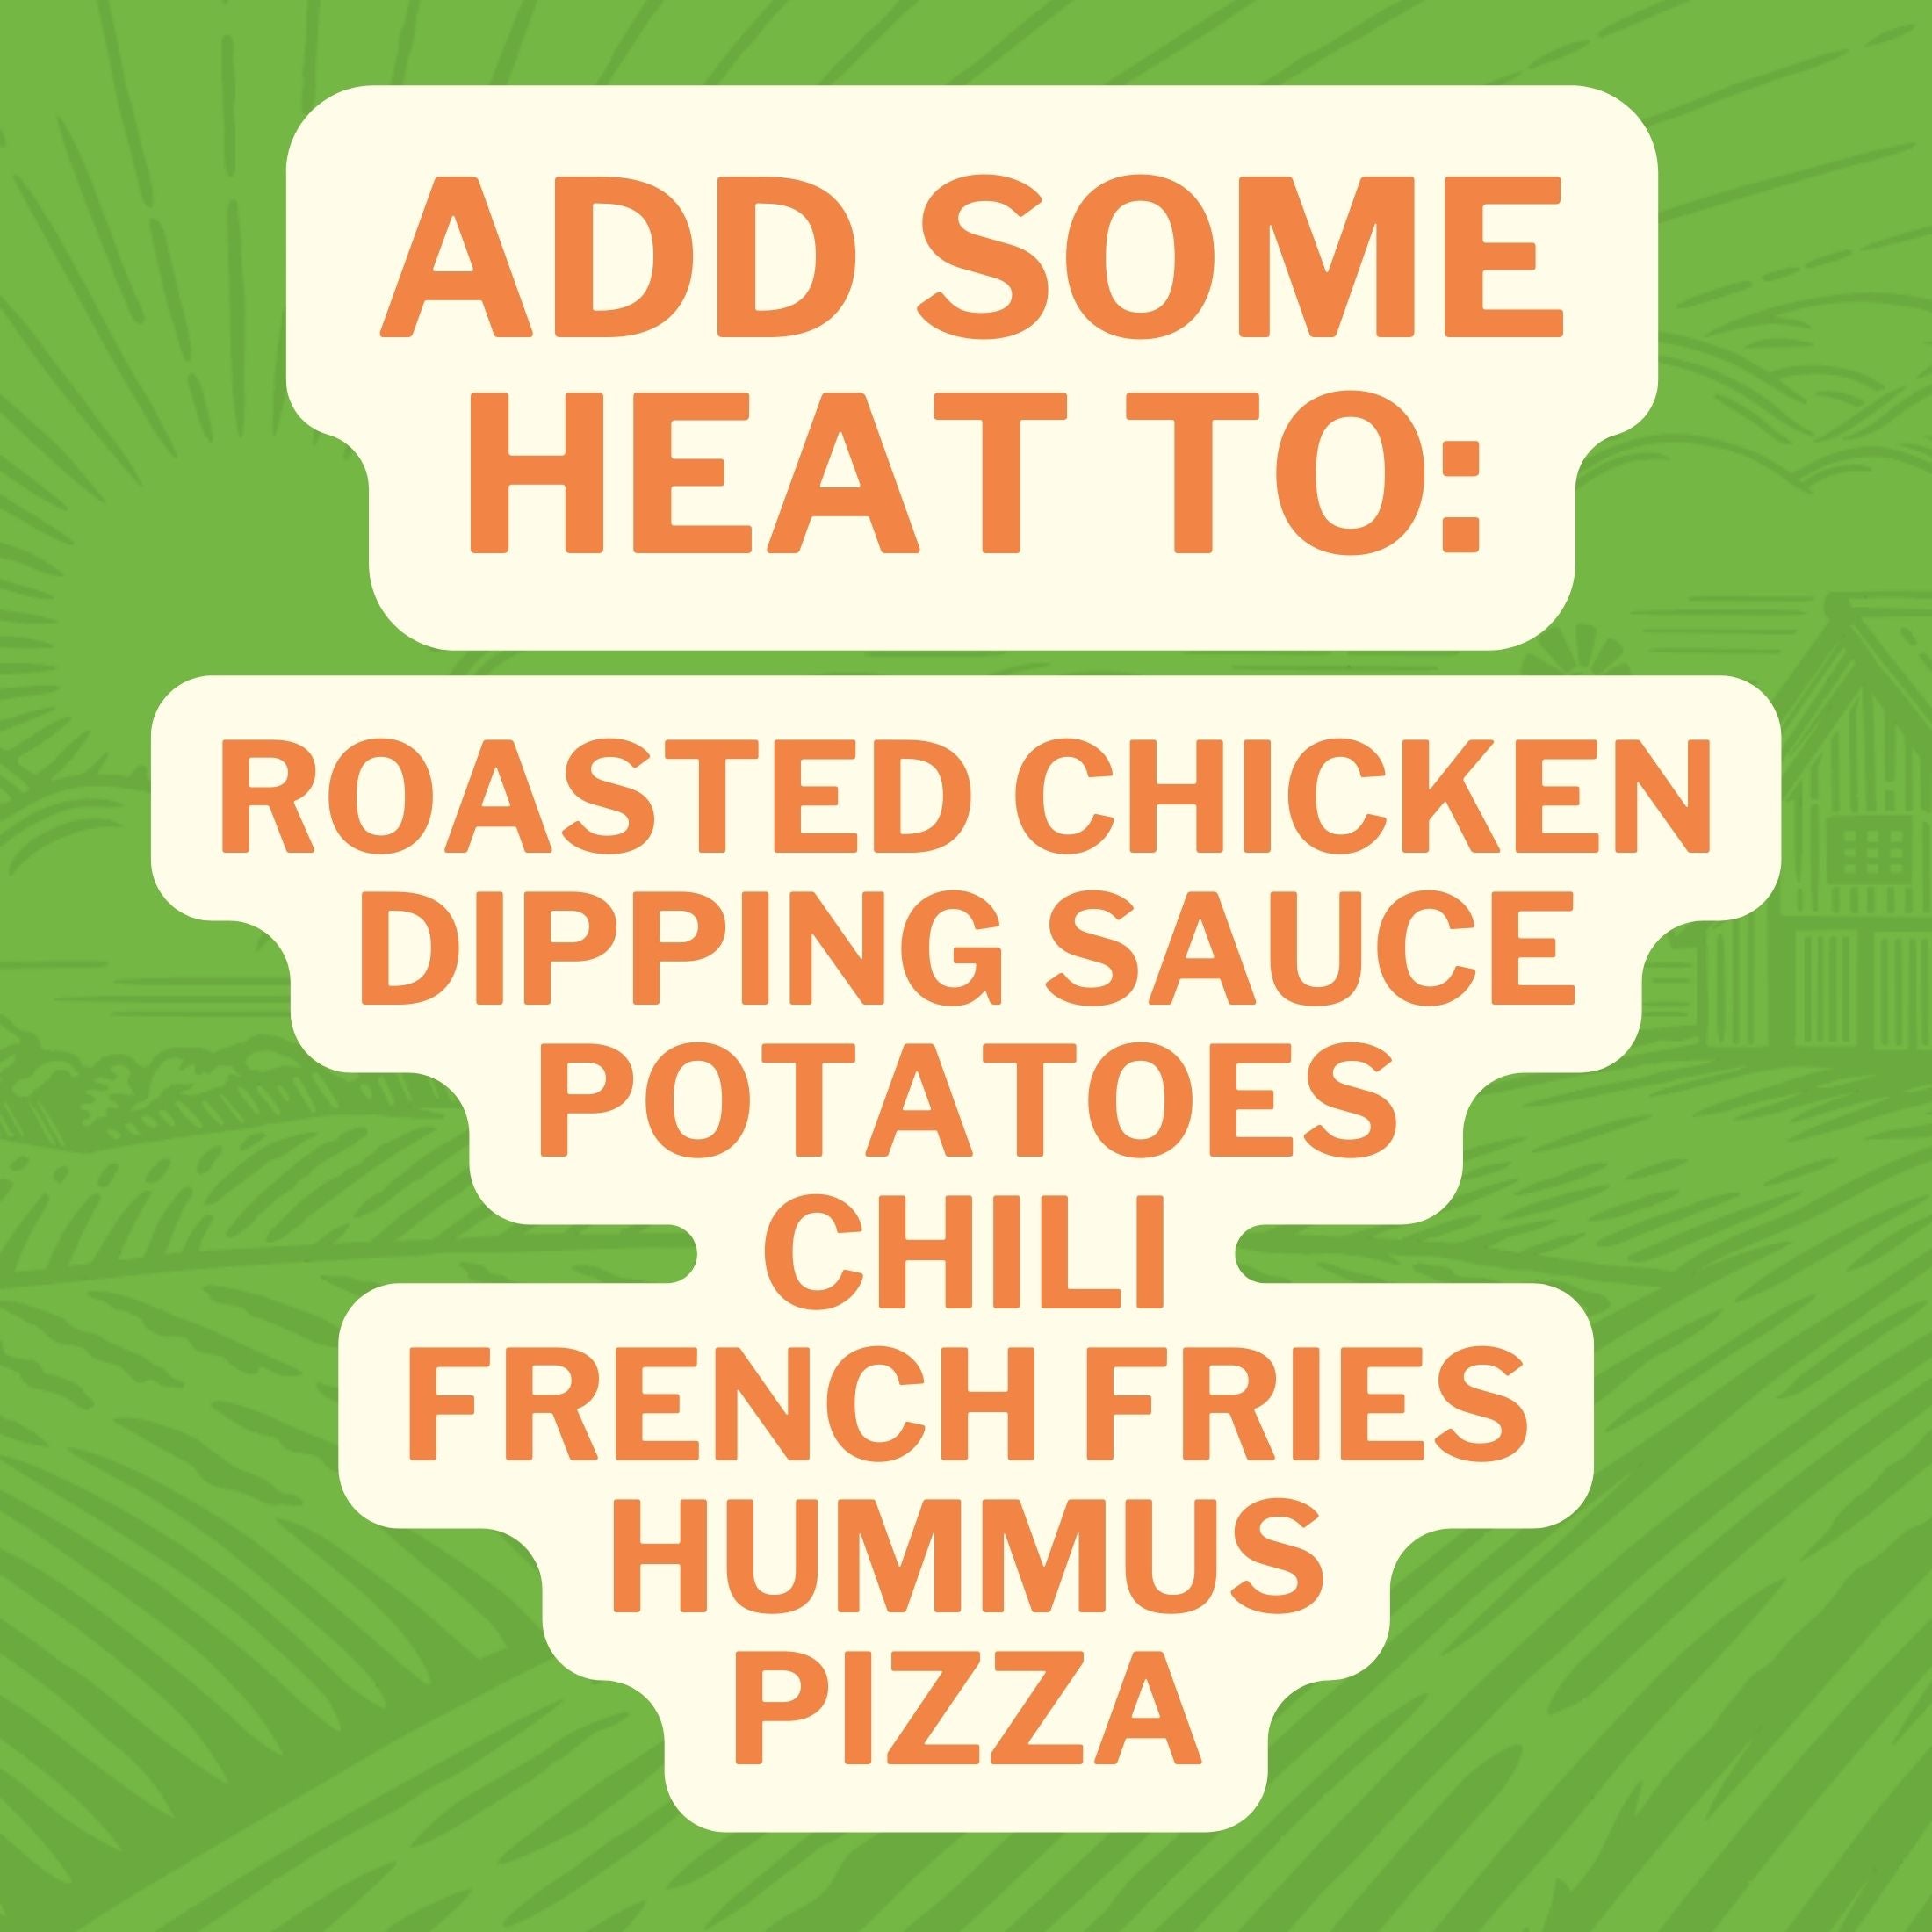 Add Some Heat To: Roasted Chicken Dipping Sauce Potatoes Chili Fresh Fries Hummus Pizza